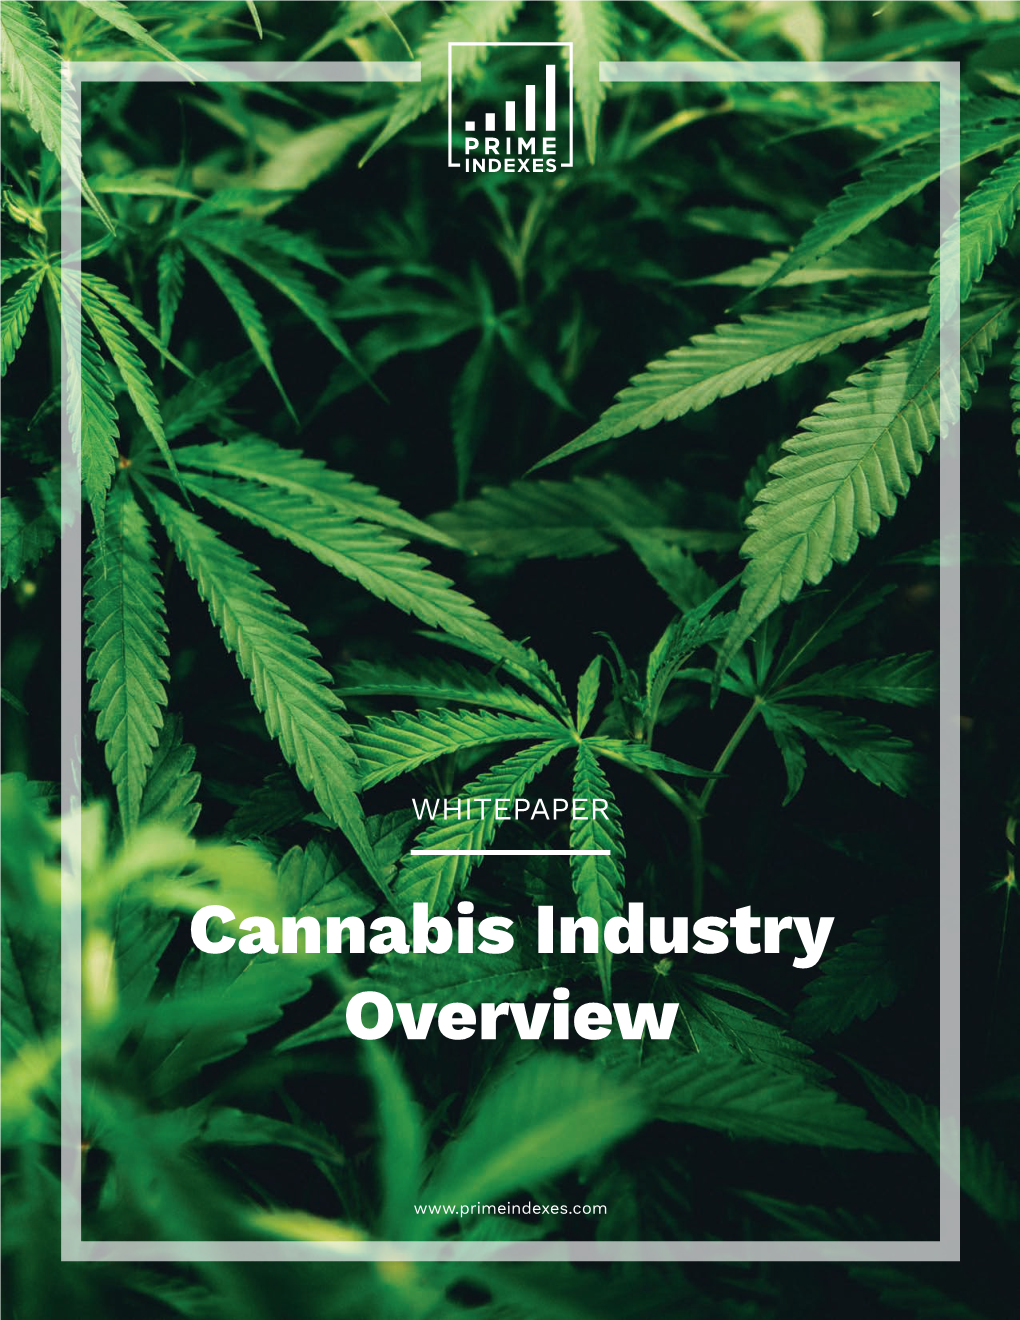 Prime Indexes Whitepaper: Cannabis Industry Overview